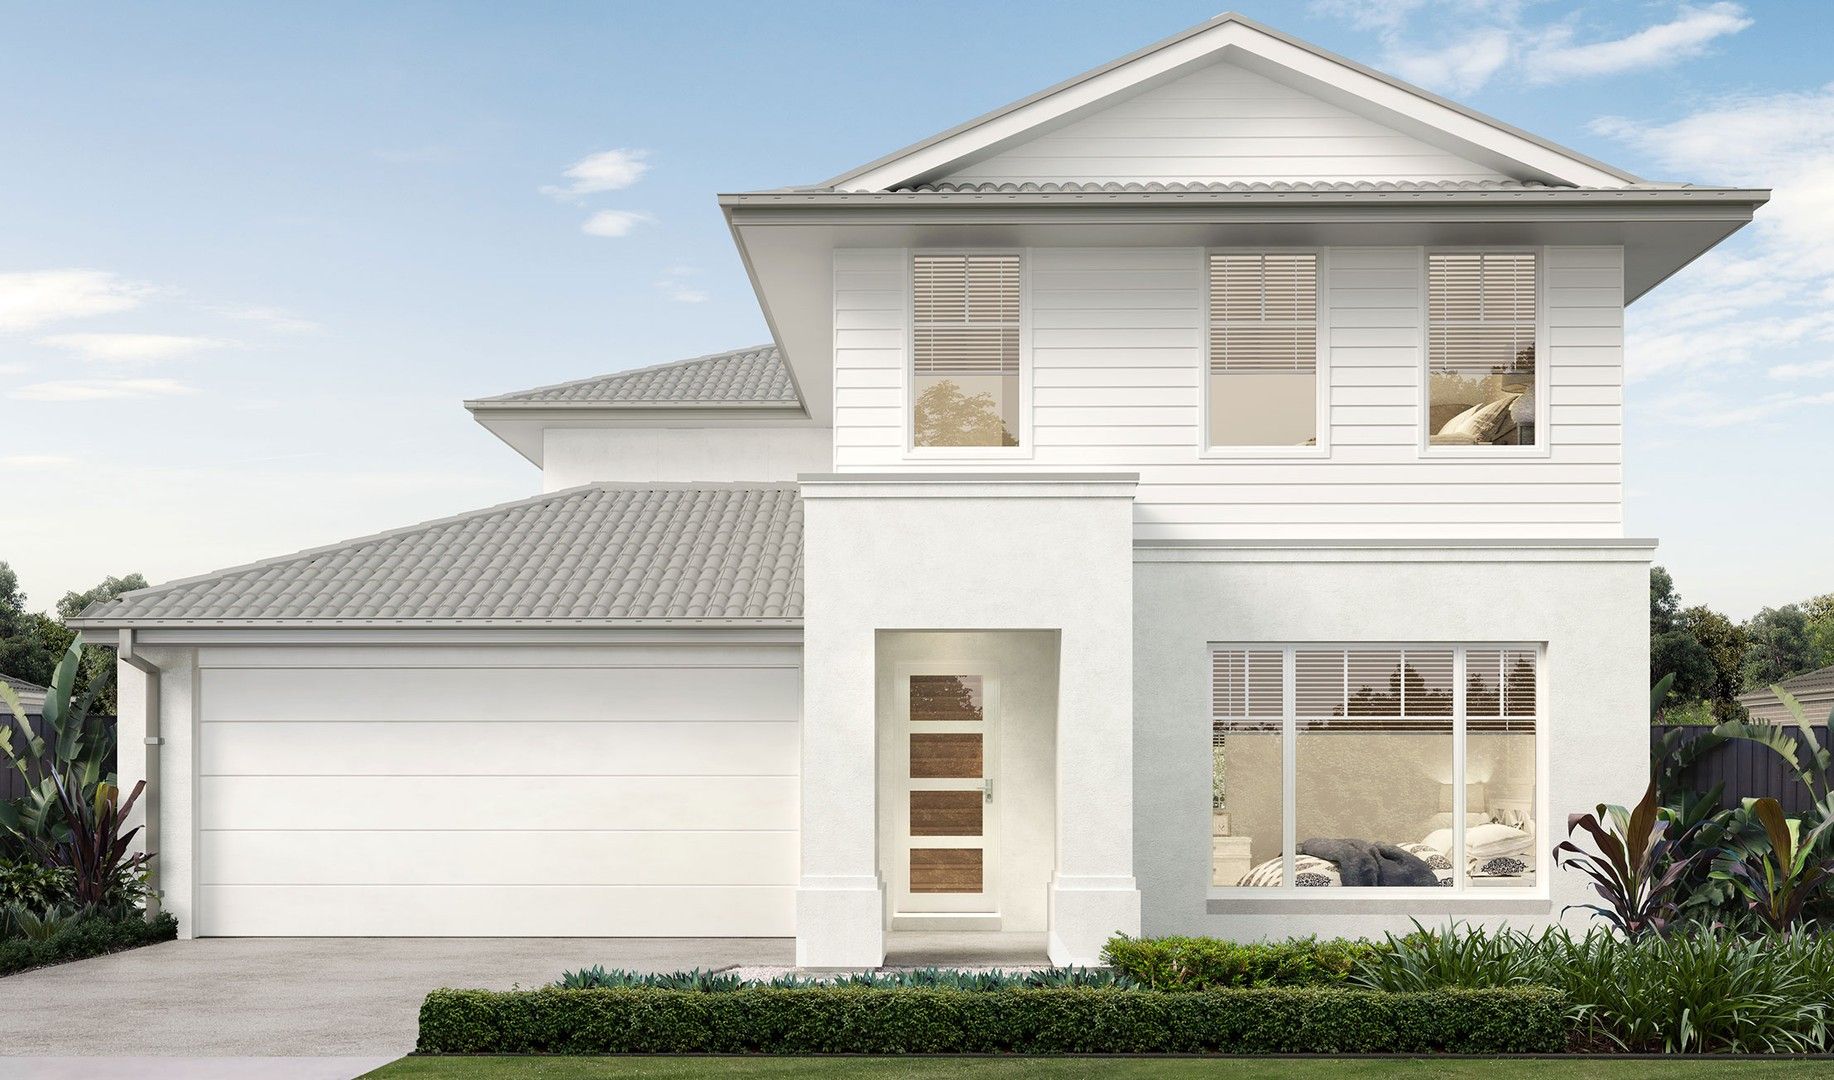 5 bedrooms New House & Land in Lot 14 New Rd BOONDALL QLD, 4034